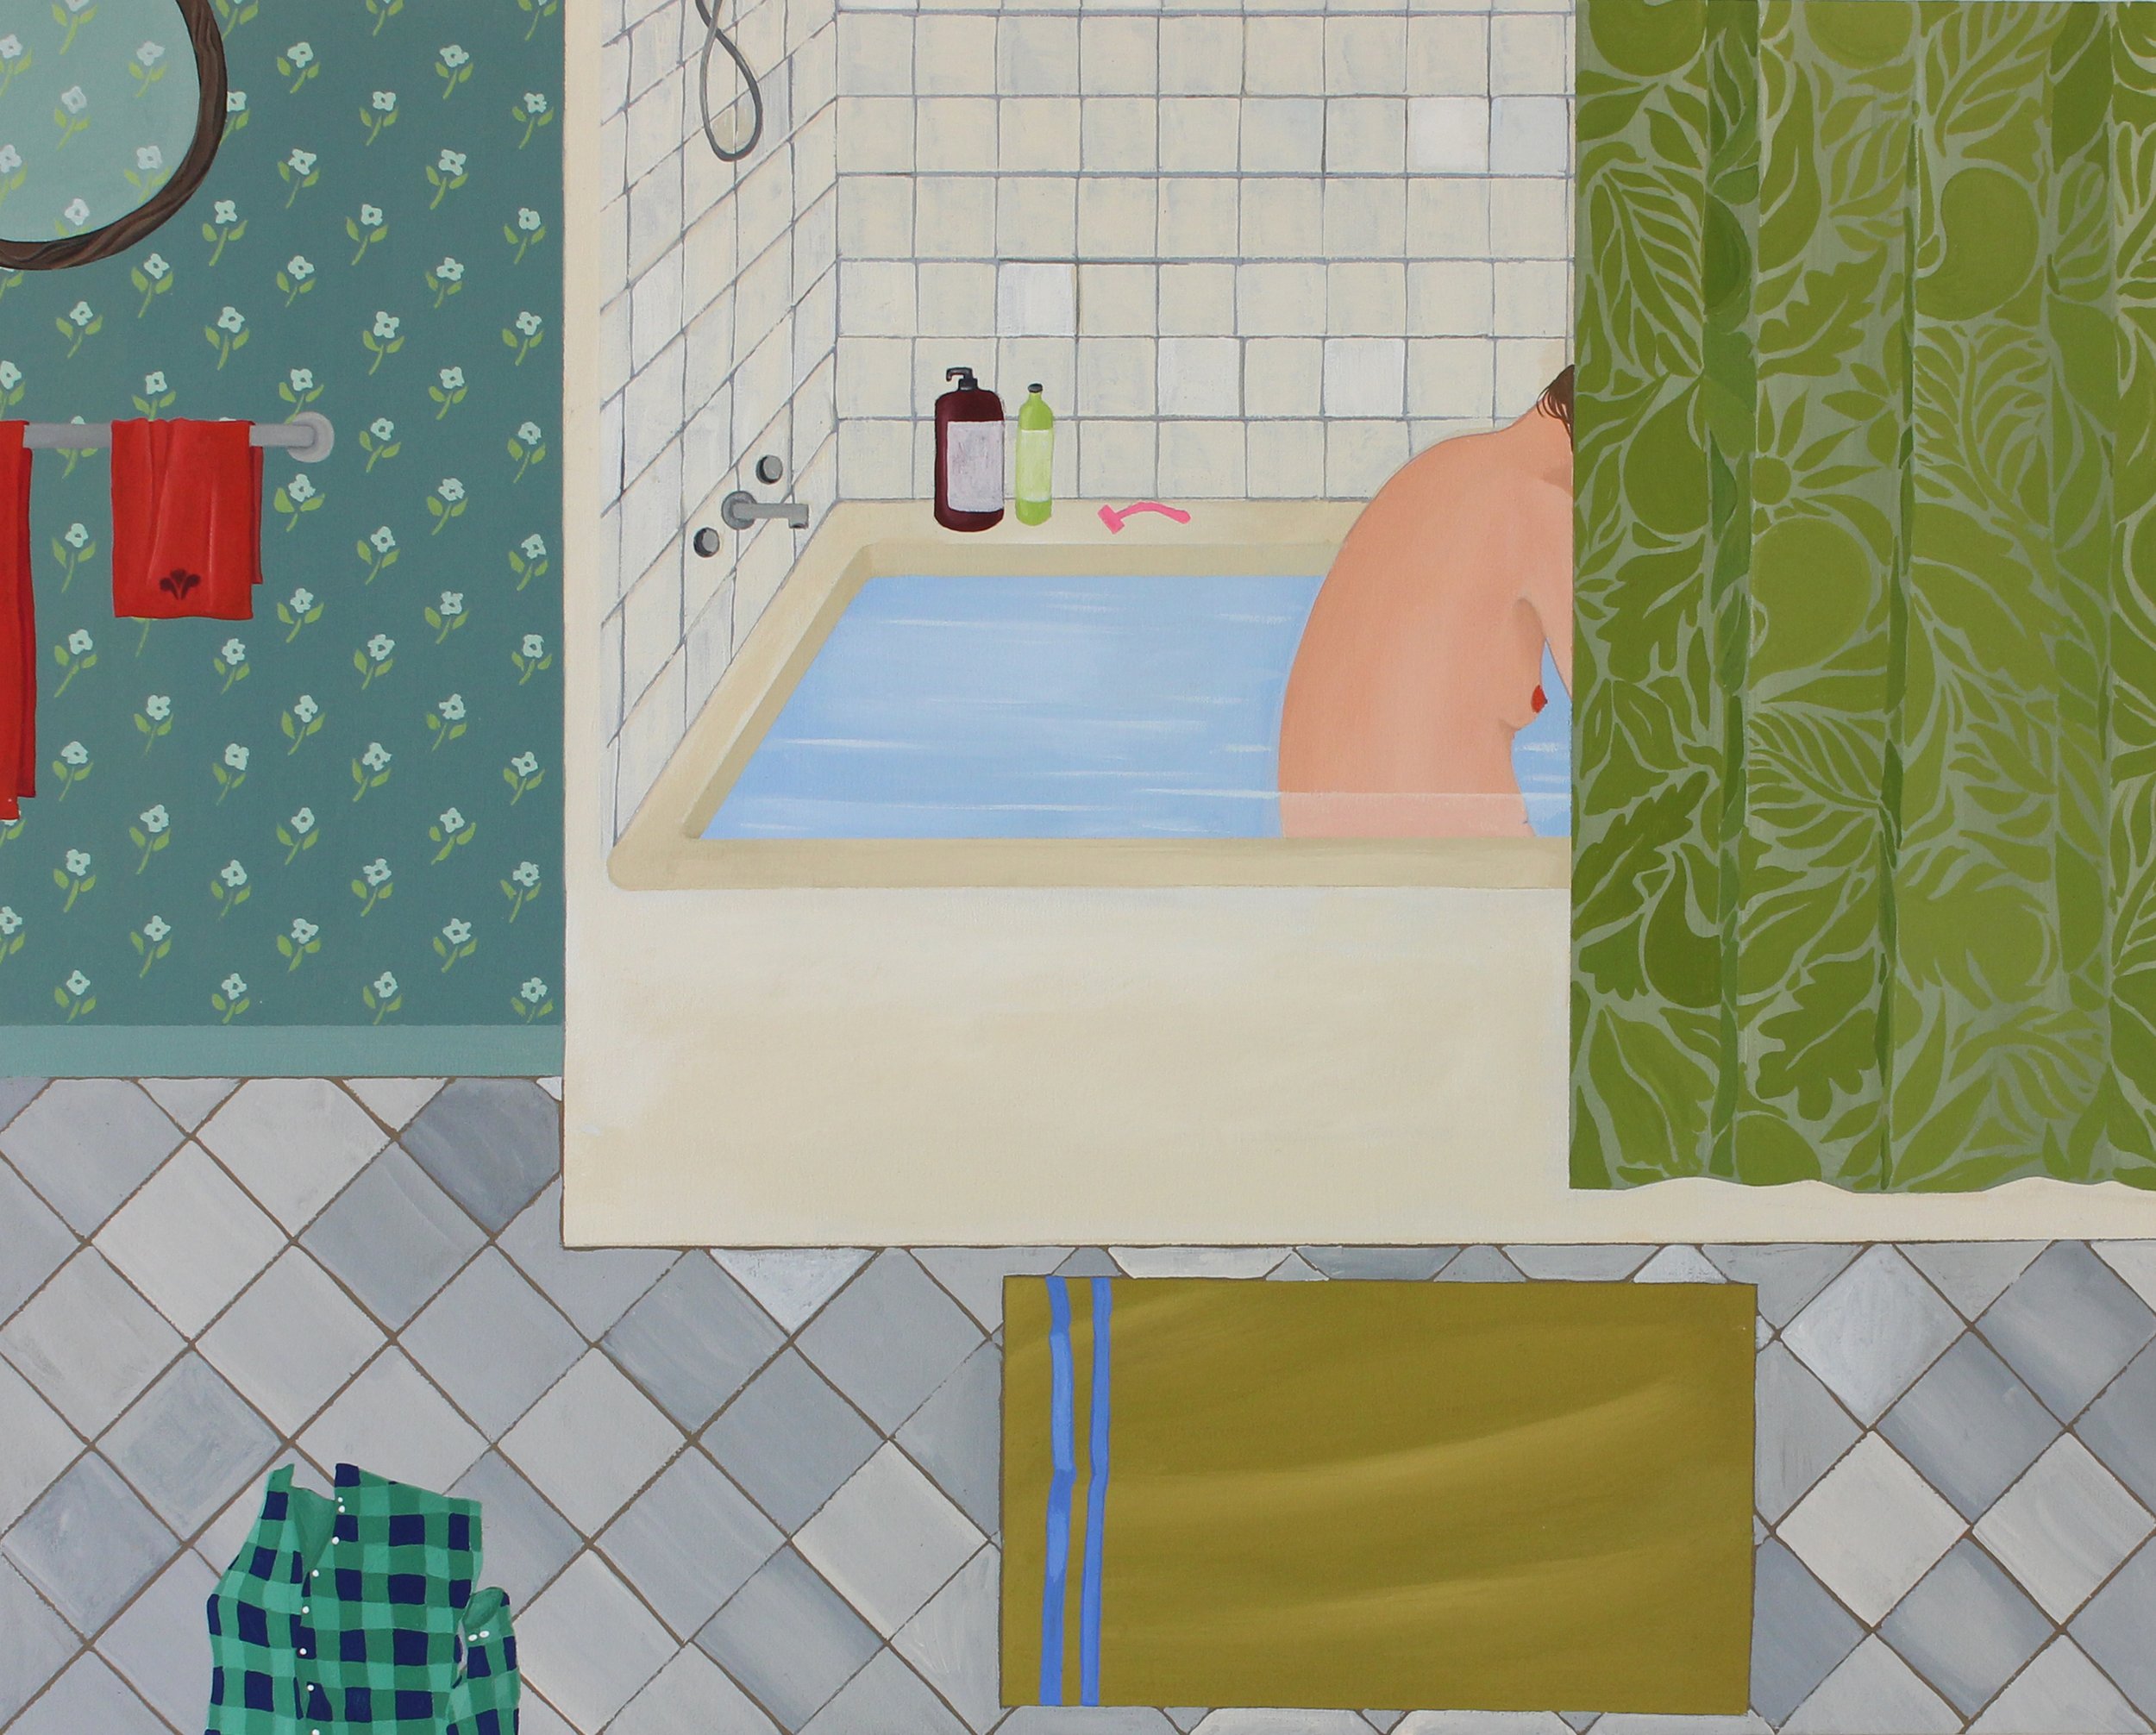 GETTING CLEAN | 16 x 20 inches / 41 x 51 cm, gouache on panel, 2022